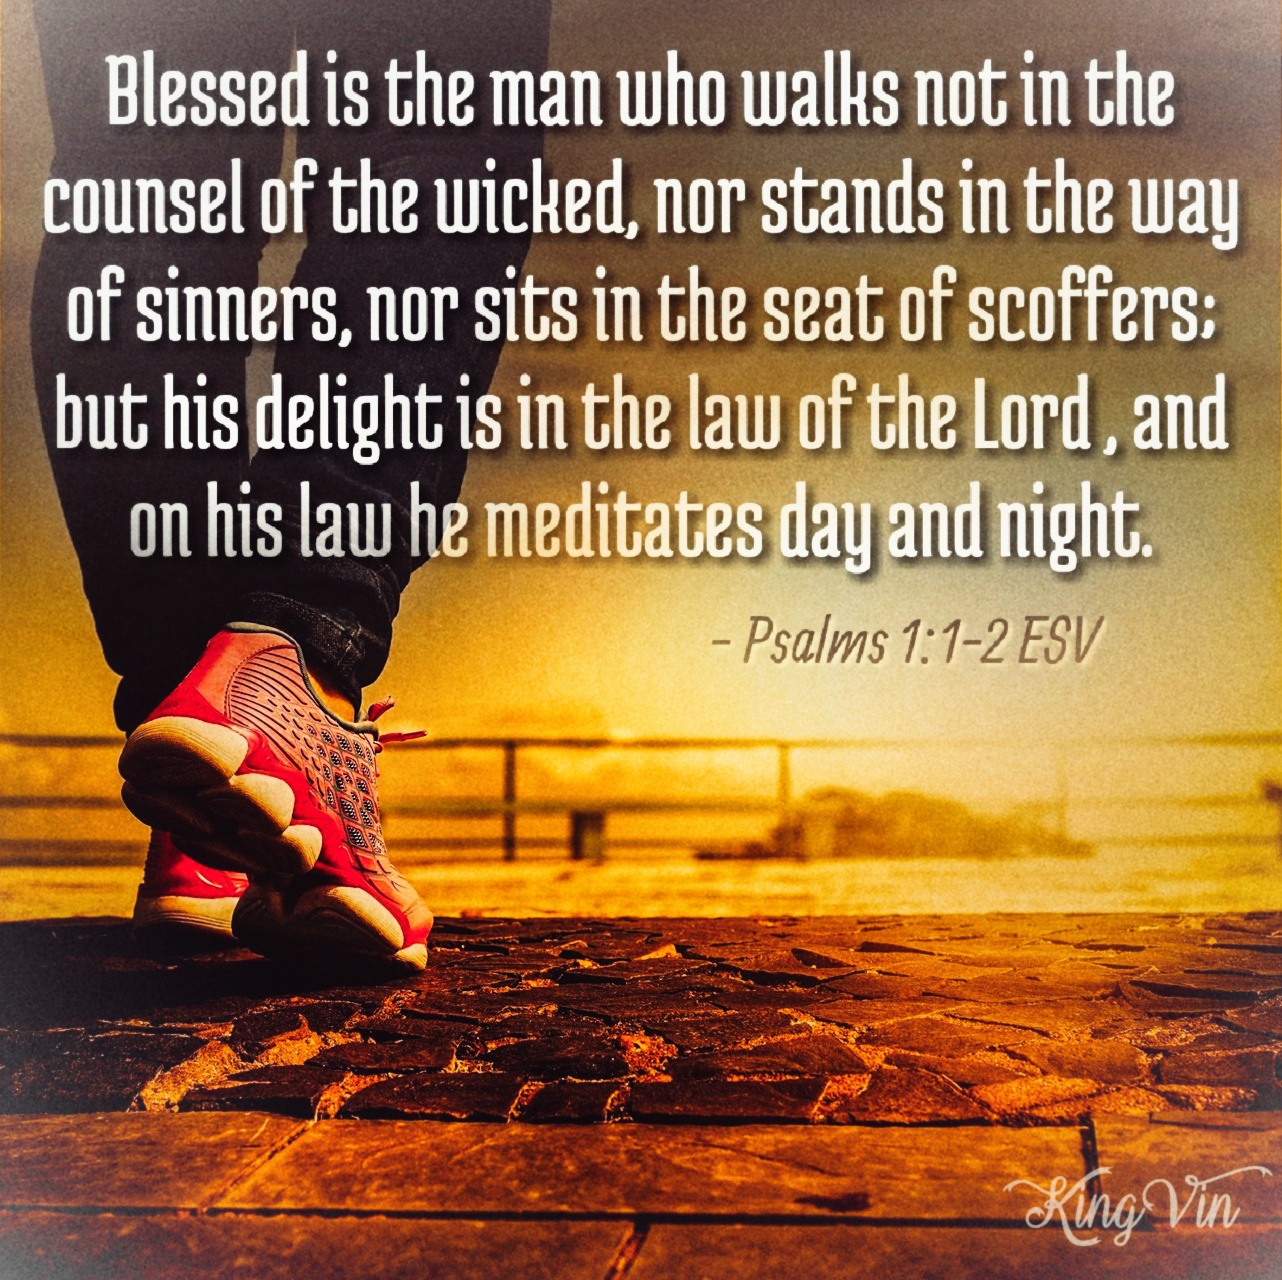 Blessed is the man who walks not in the counsel of the wicked, nor stands in the way of sinners, nor sits in the seat of scoffers; but his delight is in the law of the Lord , and on his law he meditates day and night. Psalms 1:1‭-‬2 ESV